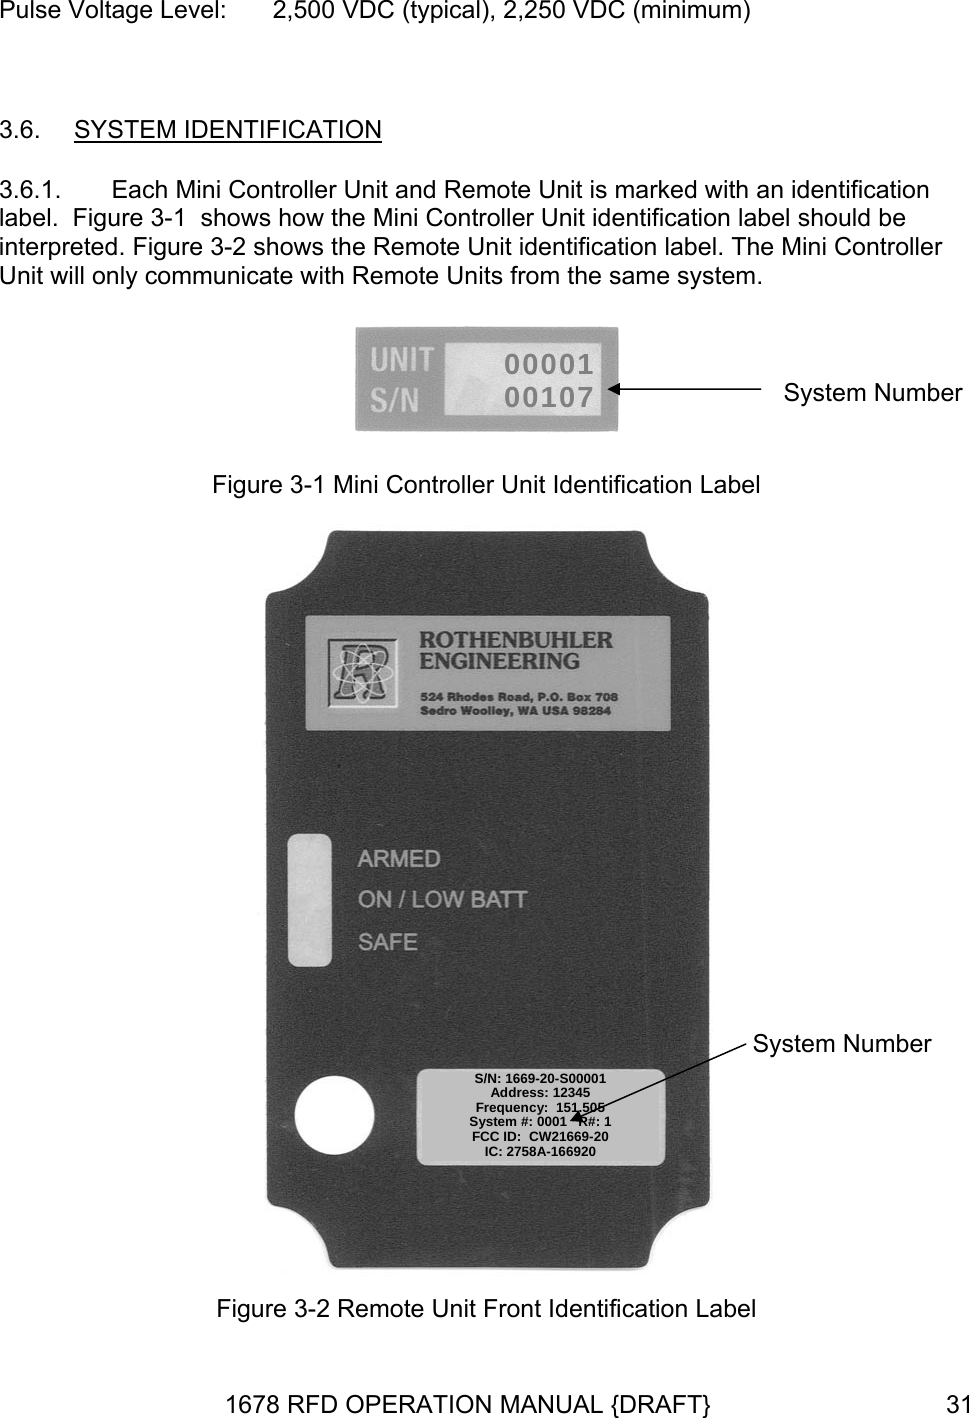 Pulse Voltage Level:  2,500 VDC (typical), 2,250 VDC (minimum)  3.6.  SYSTEM IDENTIFICATION 3.6.1.  Each Mini Controller Unit and Remote Unit is marked with an identification label.  Figure 3-1  shows how the Mini Controller Unit identification label should be interpreted. Figure 3-2 shows the Remote Unit identification label. The Mini Controller Unit will only communicate with Remote Units from the same system.  0000100107 System Number  Figure 3-1 Mini Controller Unit Identification Label  S/N: 1669-20-S00001Address: 12345 Frequency:  151.505 System #: 0001   R#: 1 FCC ID:  CW21669-20 IC: 2758A-166920 System Number Figure 3-2 Remote Unit Front Identification Label 1678 RFD OPERATION MANUAL {DRAFT}  31